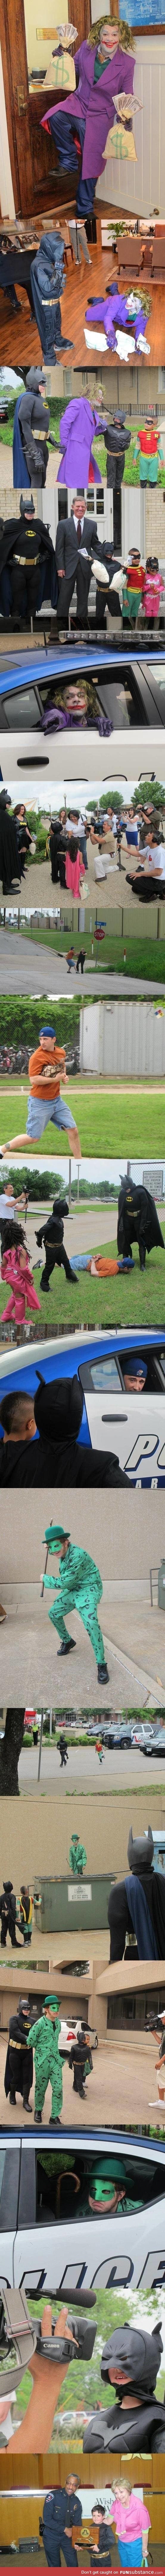 Cancer Kid Gets to be Batman for a day